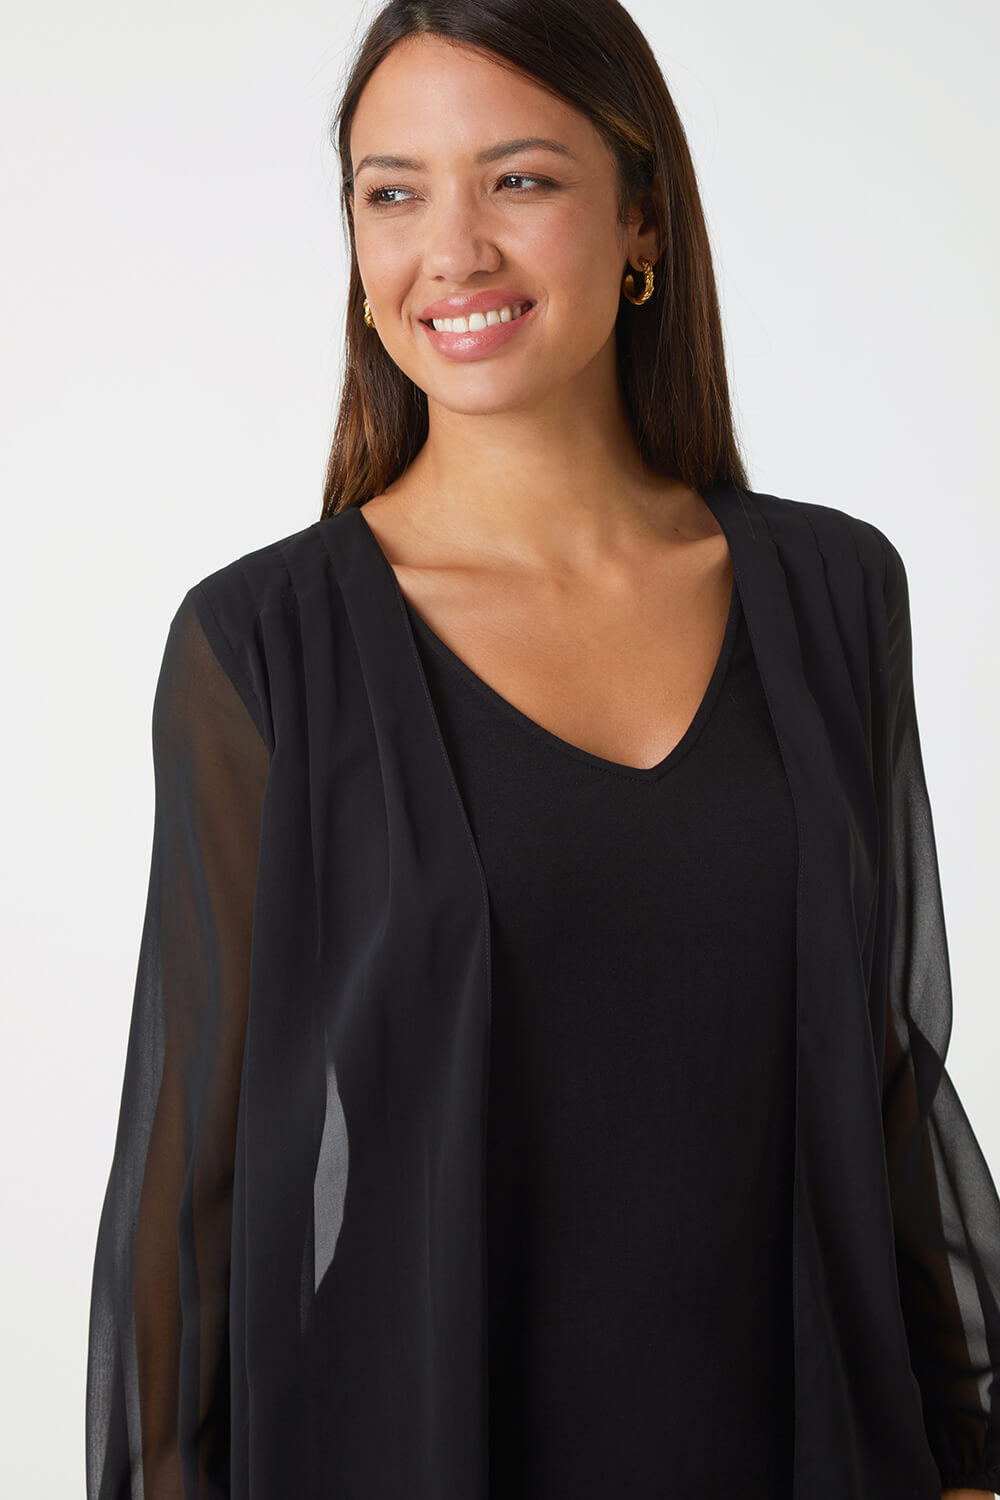 Black Contrast Chiffon Overlay Stretch Top, Image 4 of 5